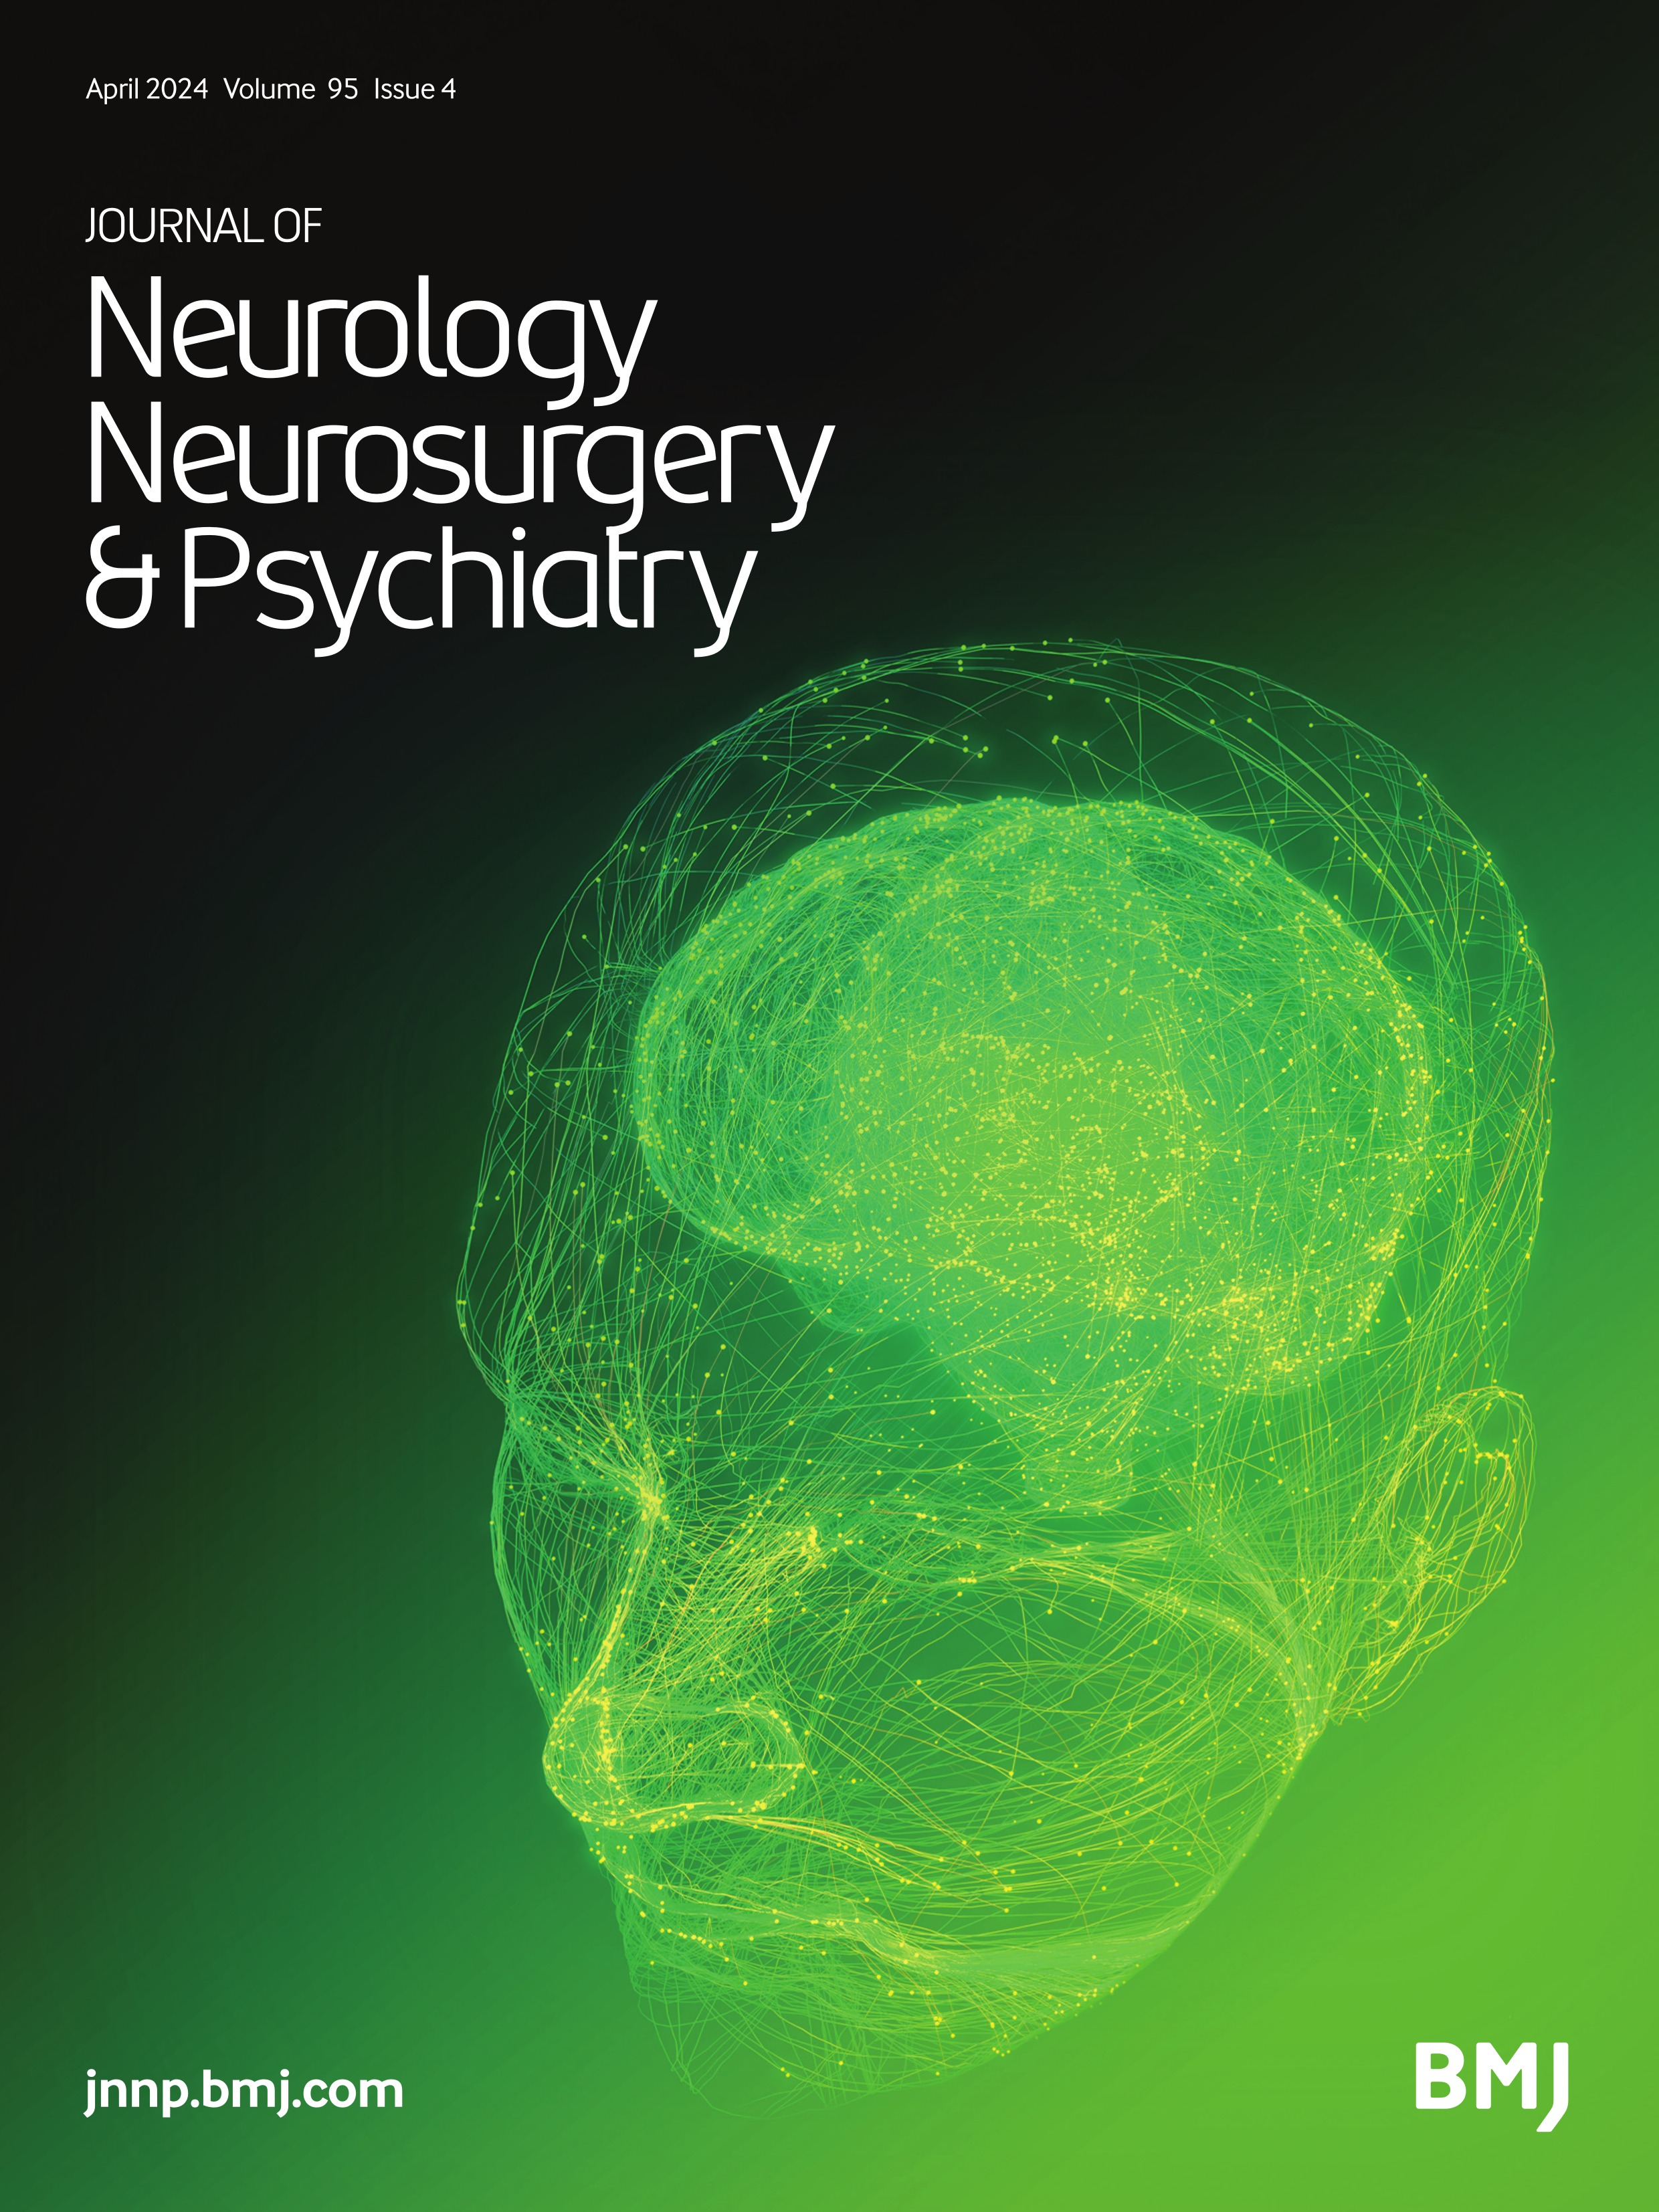 Temporal course of cognitive and behavioural changes in motor neuron diseases